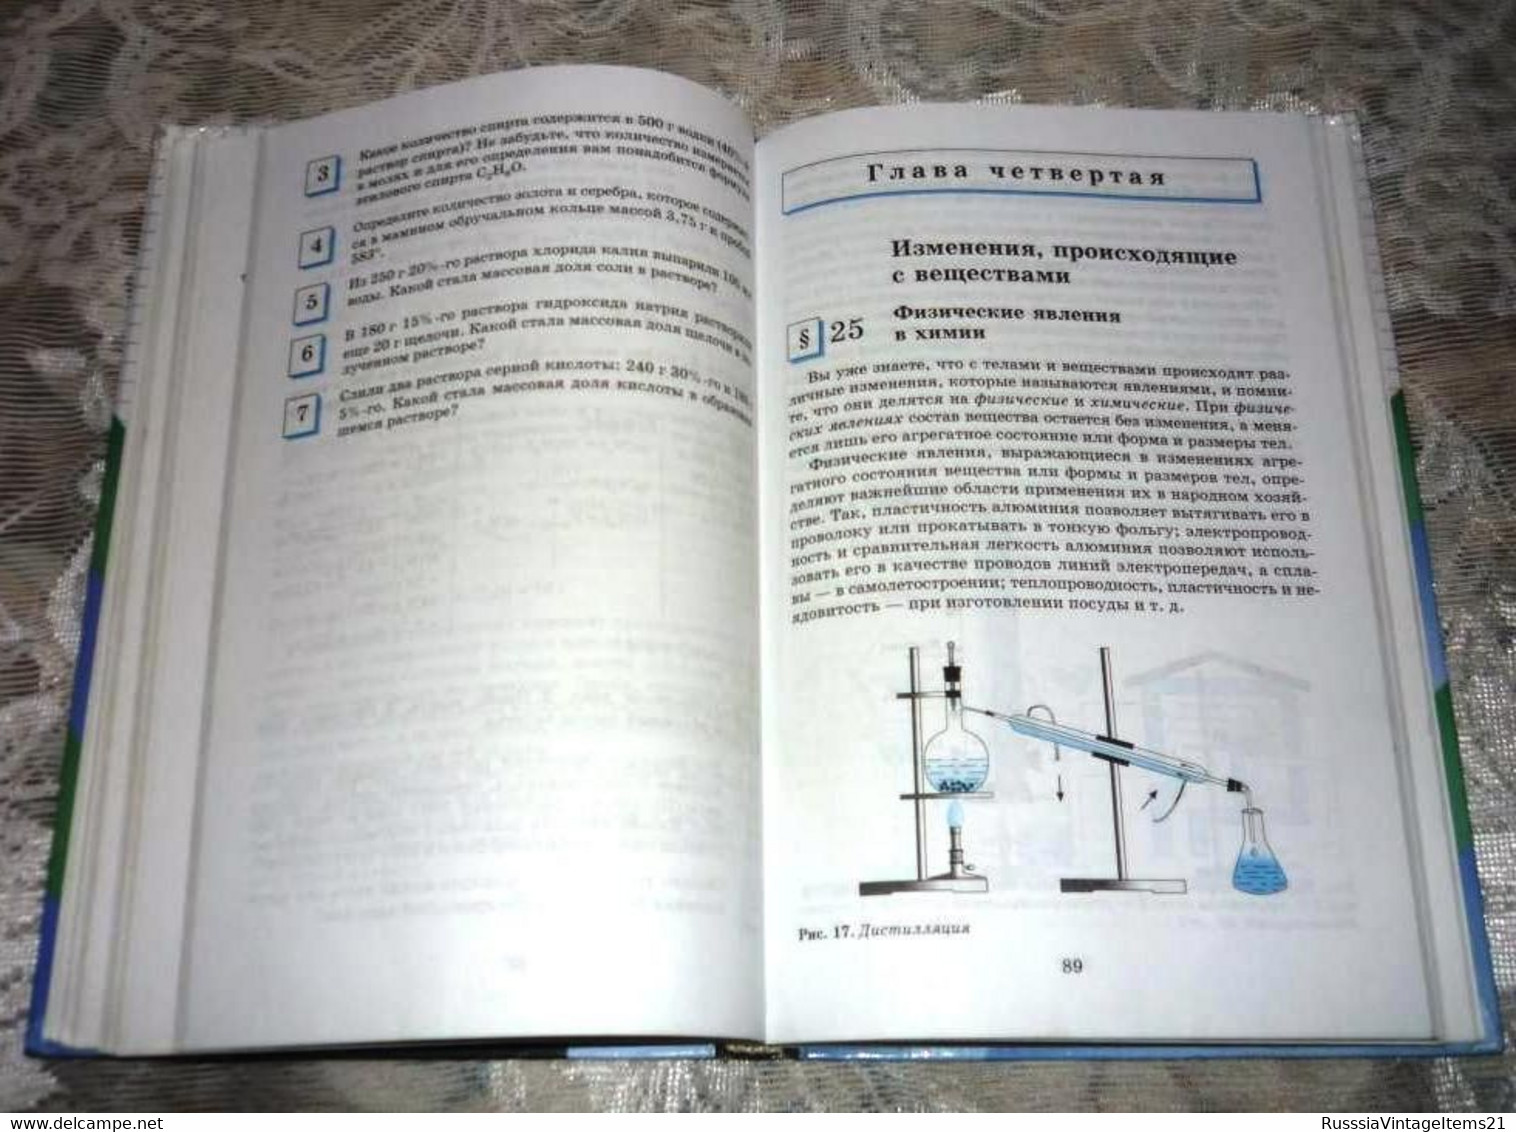 Russian Textbook - In Russian - Textbook From Russia - Gabrielyan O. Chemistry. 8th Grade - Langues Slaves